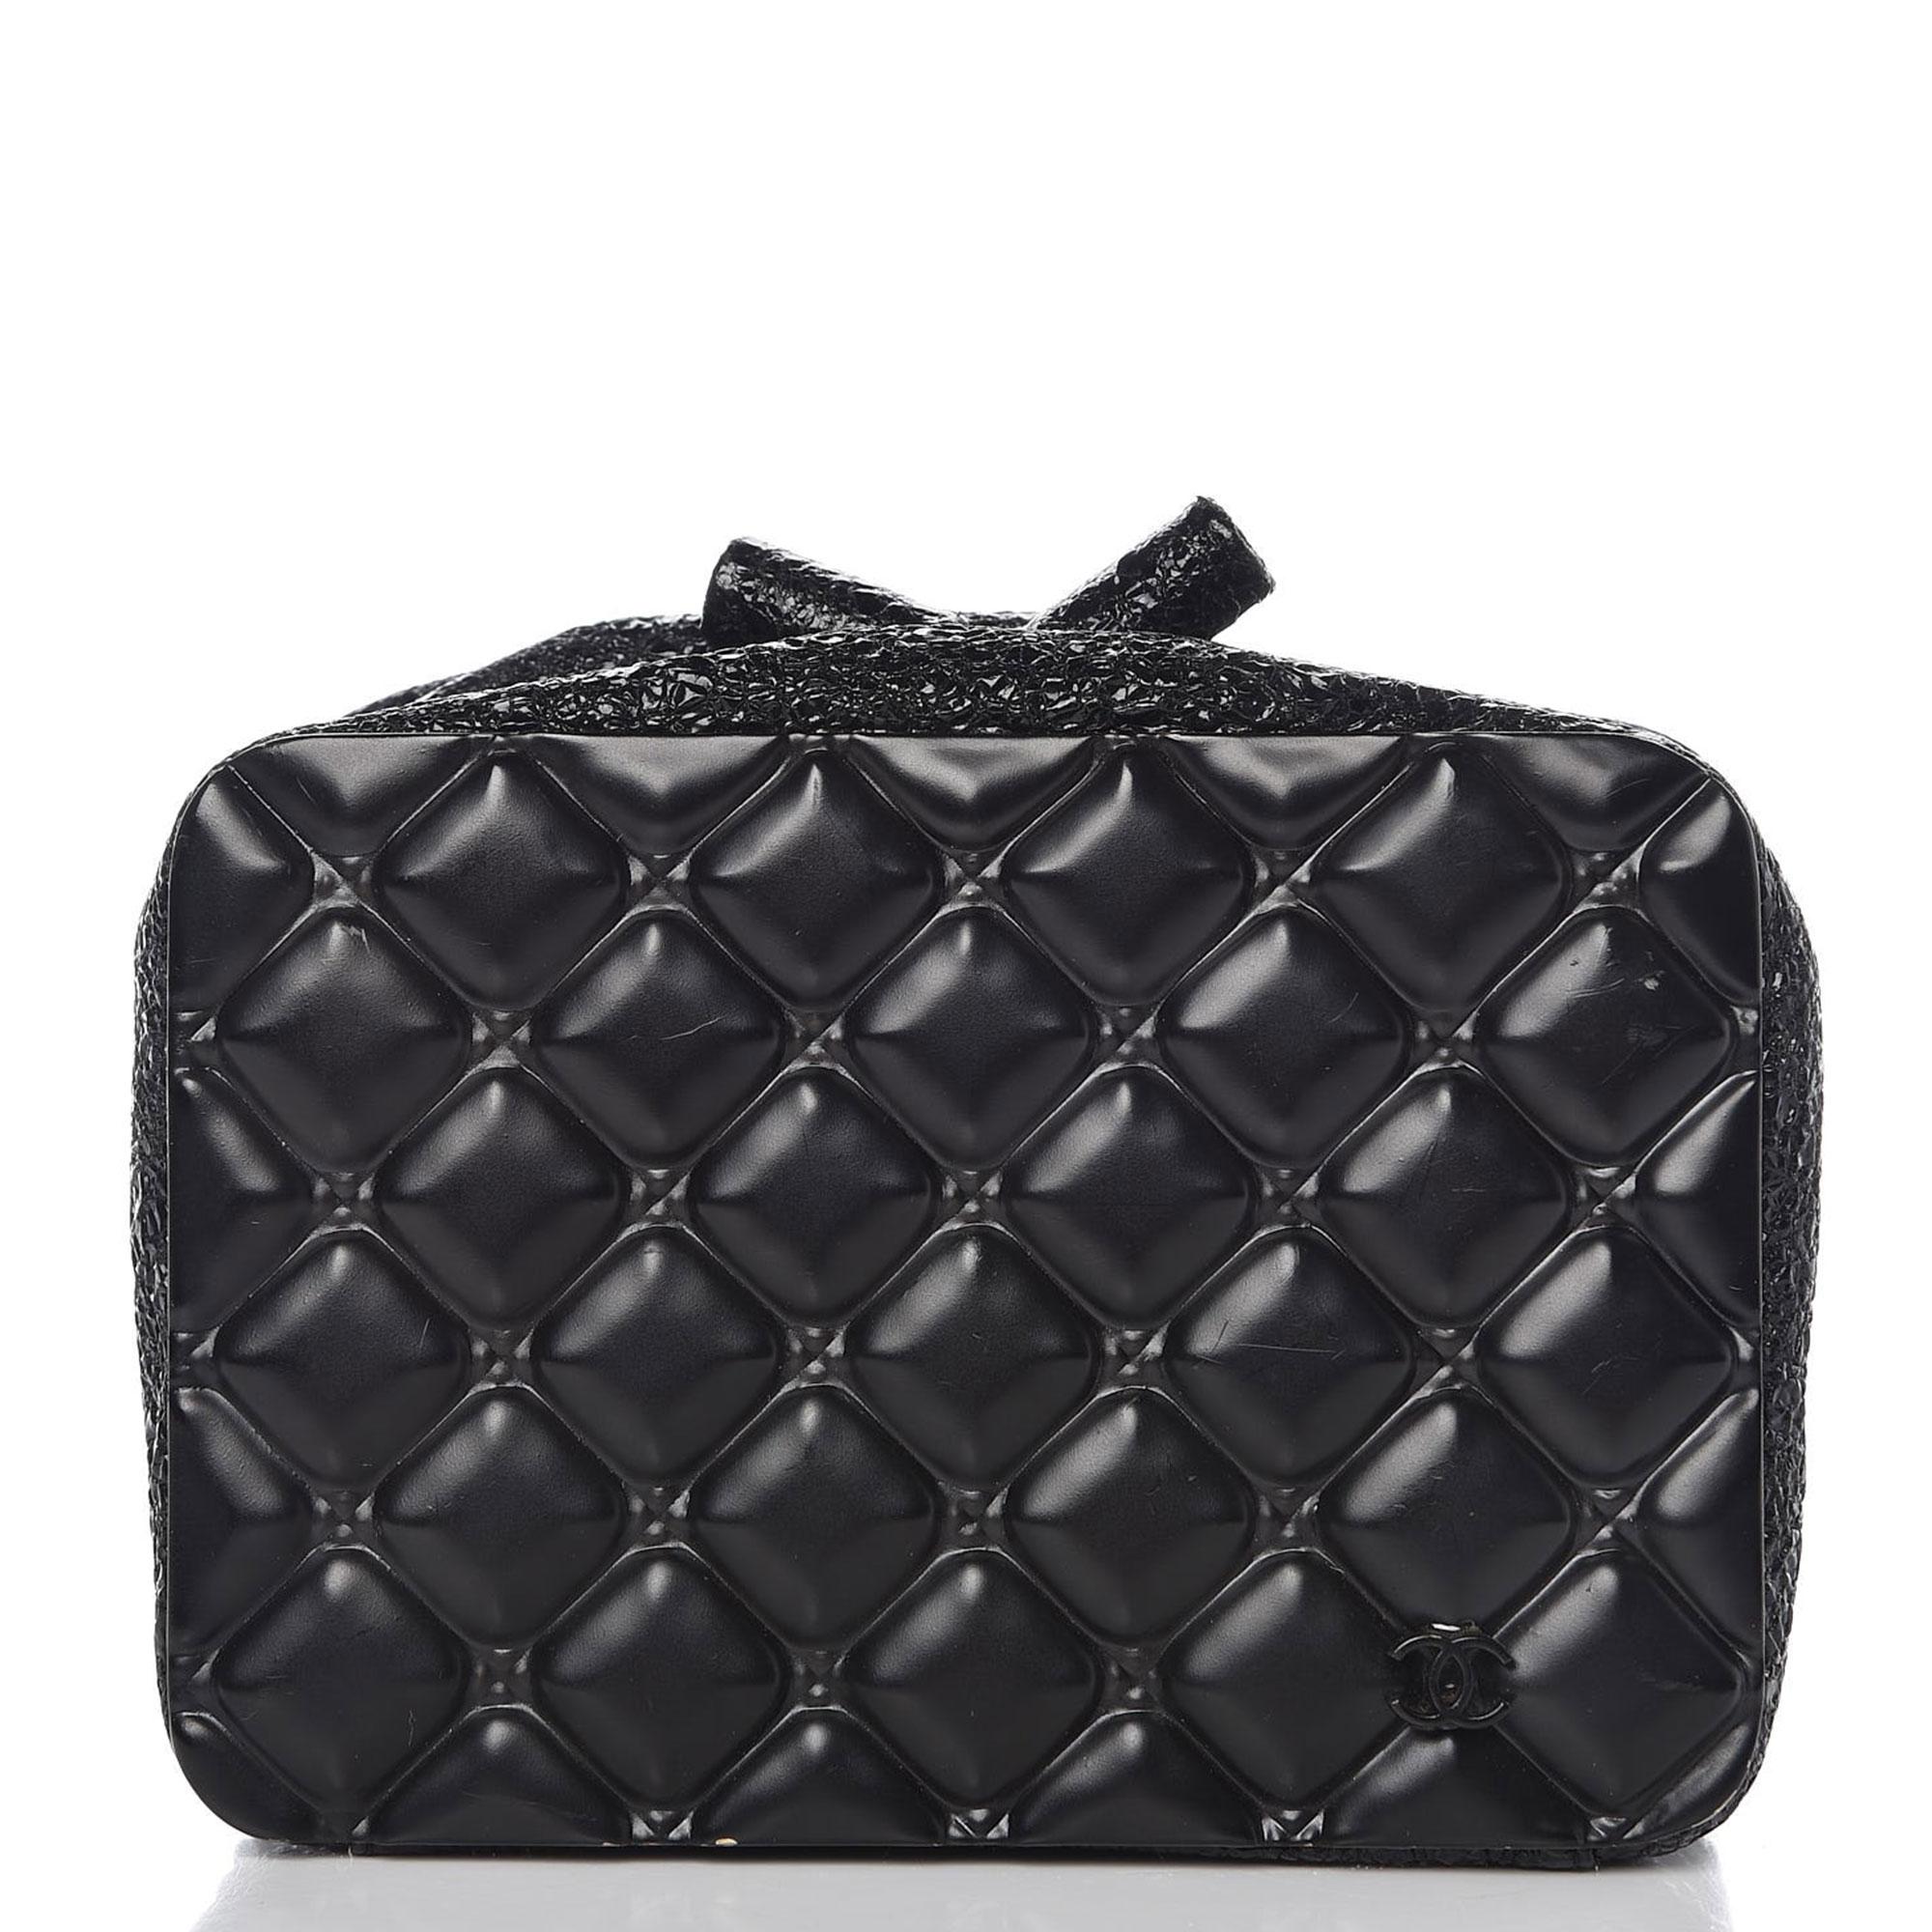 Chanel Minaudière Moscow Leo Runway Rare So Black Charcoal Grey Metal Clutch

Metal in a quilted pattern
Crinkled patent leather
Toggles that open like a change pocket 
Satin all black interior
Featuring a stone encrusted lion's head with the